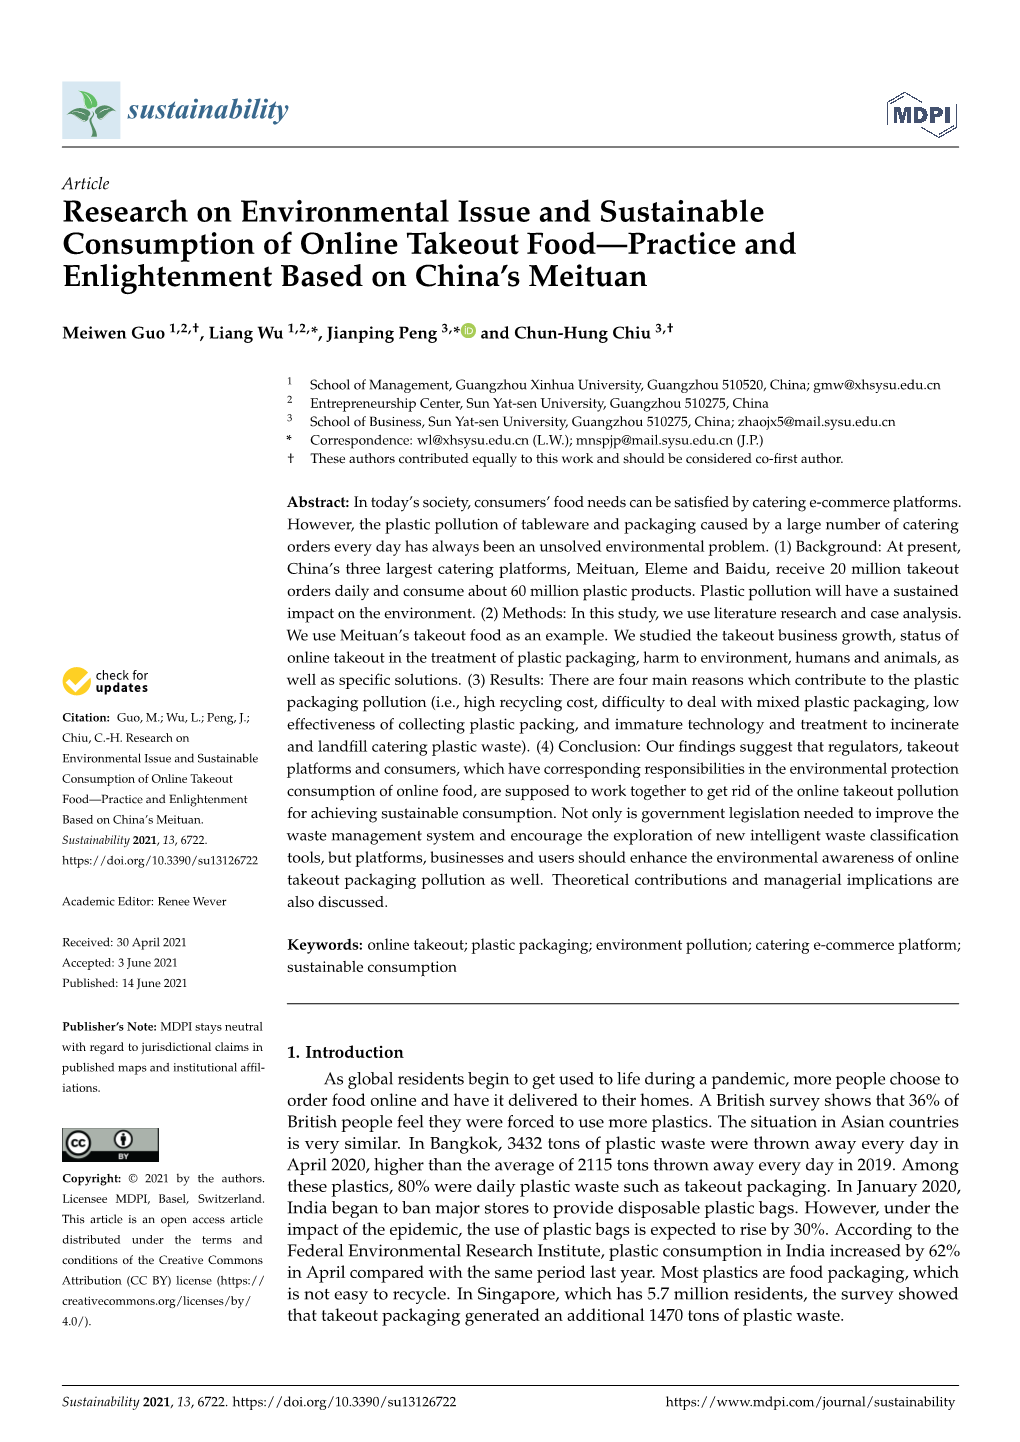 Research on Environmental Issue and Sustainable Consumption of Online Takeout Food—Practice and Enlightenment Based on China’S Meituan